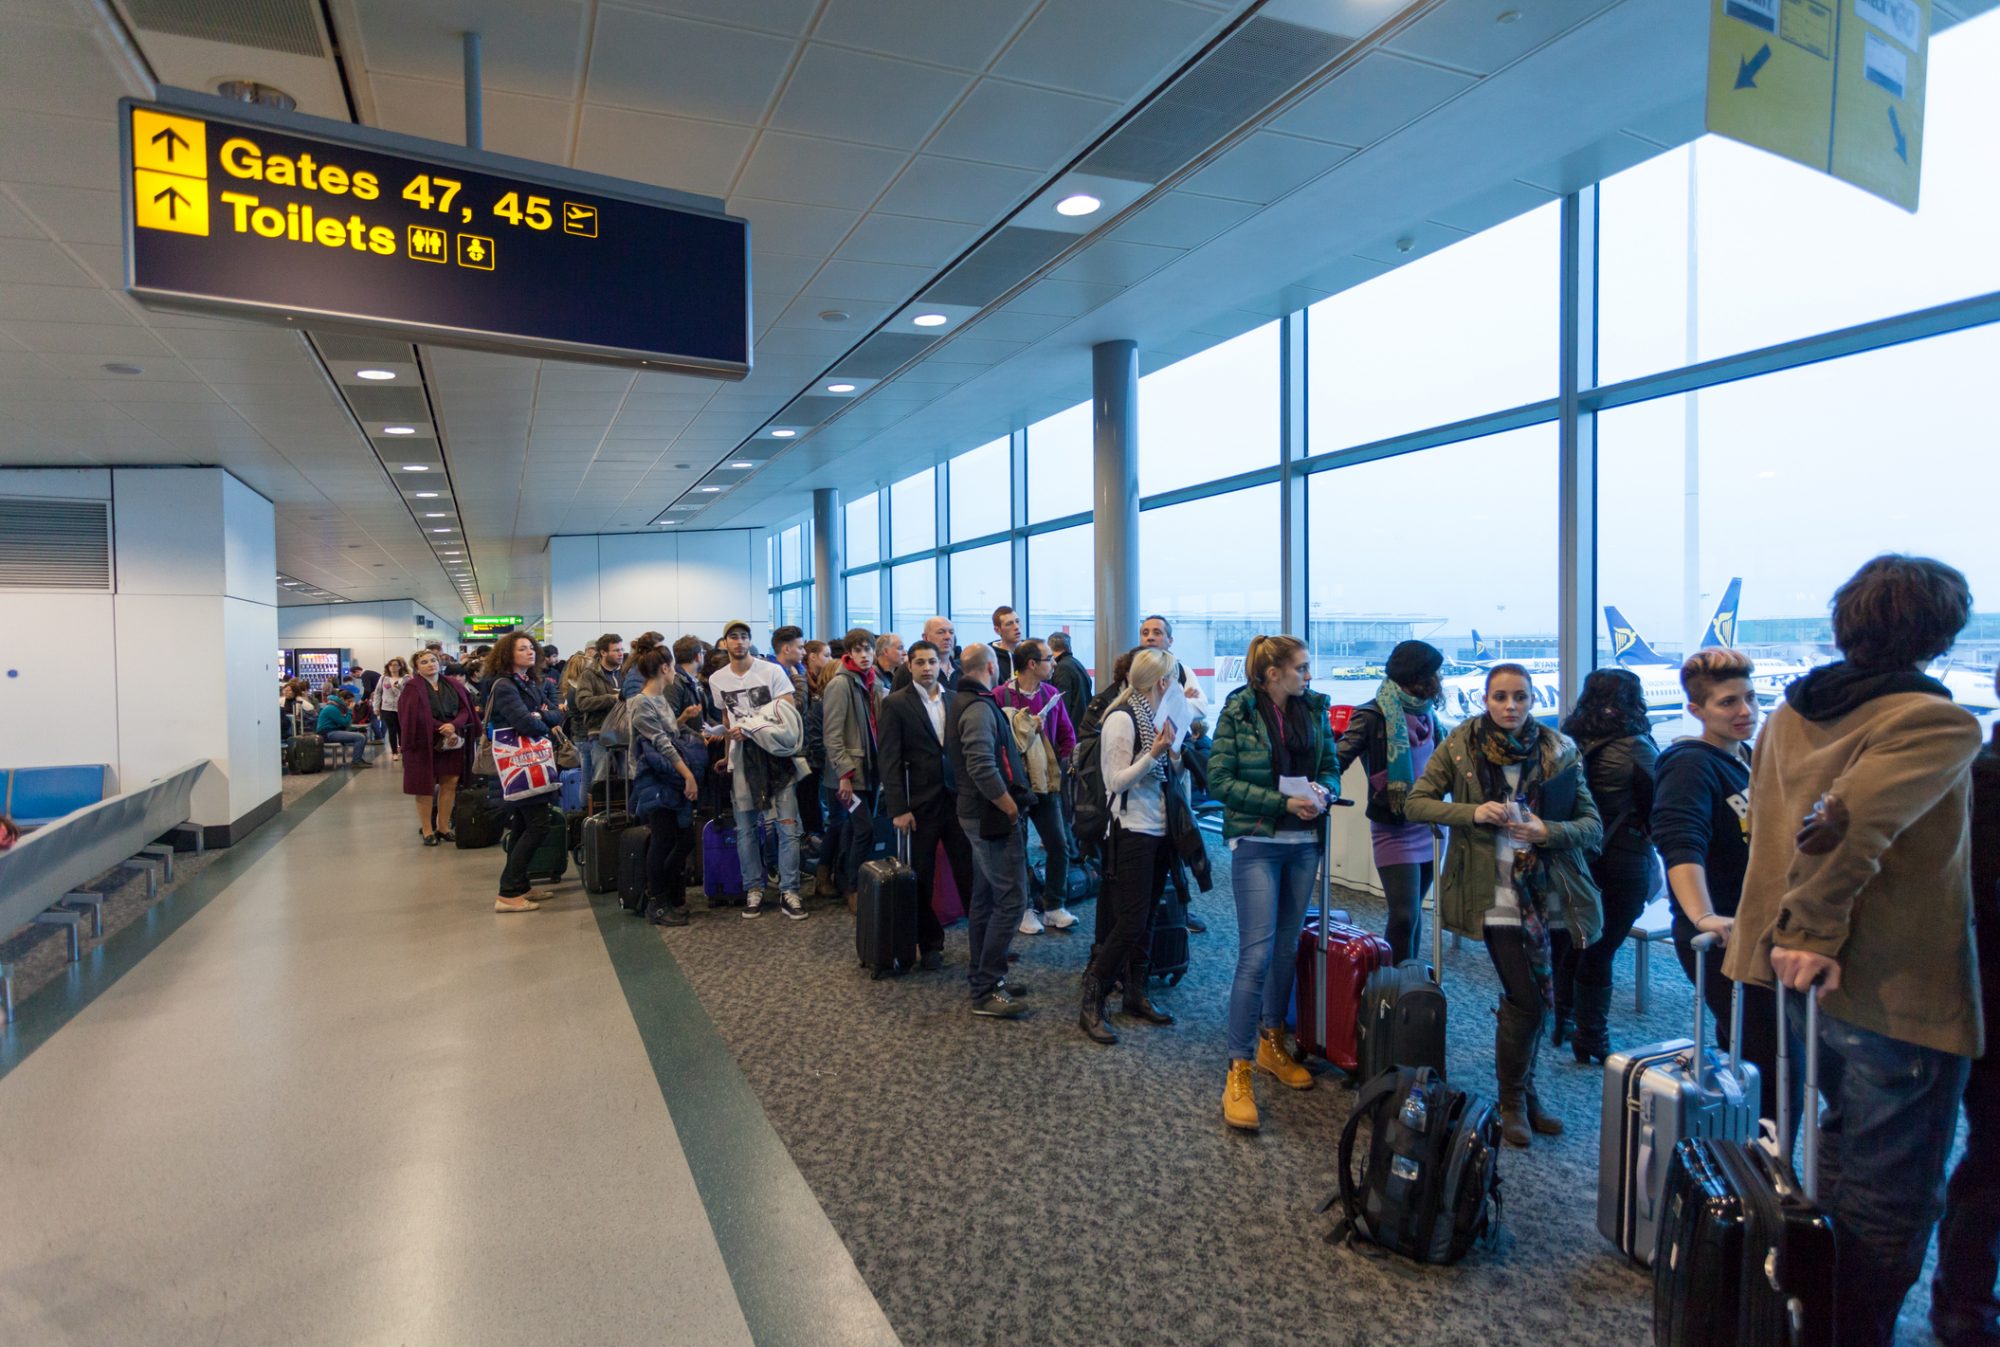 London, United Kingdom - November 2, 2013: Air traveller waiting in queue for boarding at London Stansted Airport.